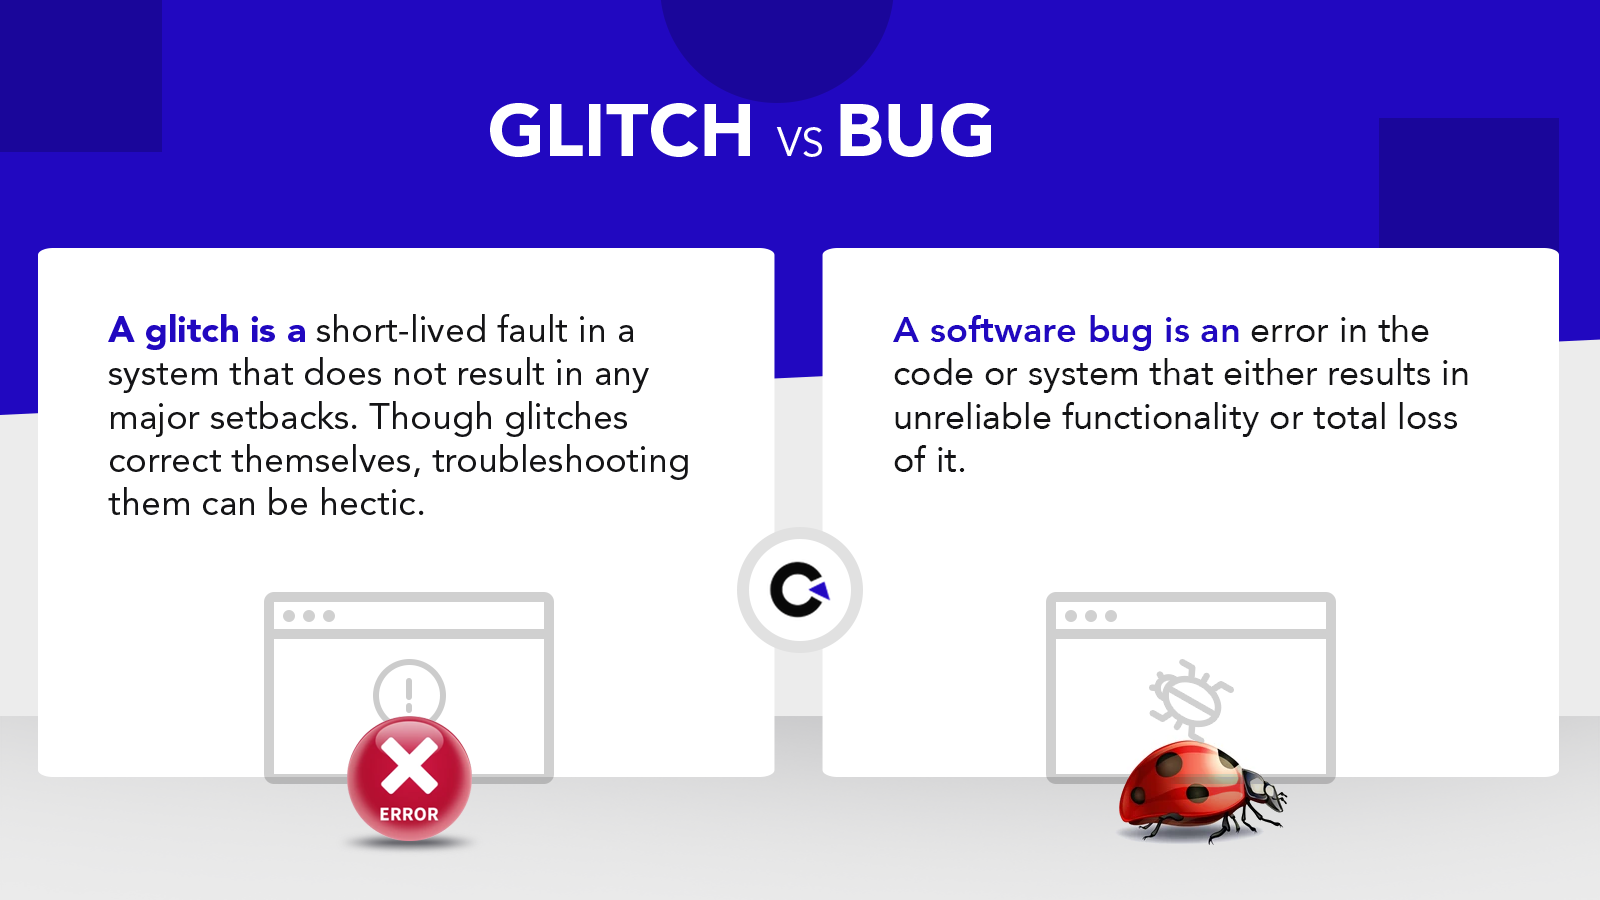 Glitch vs Bug - Types of Software Bugs